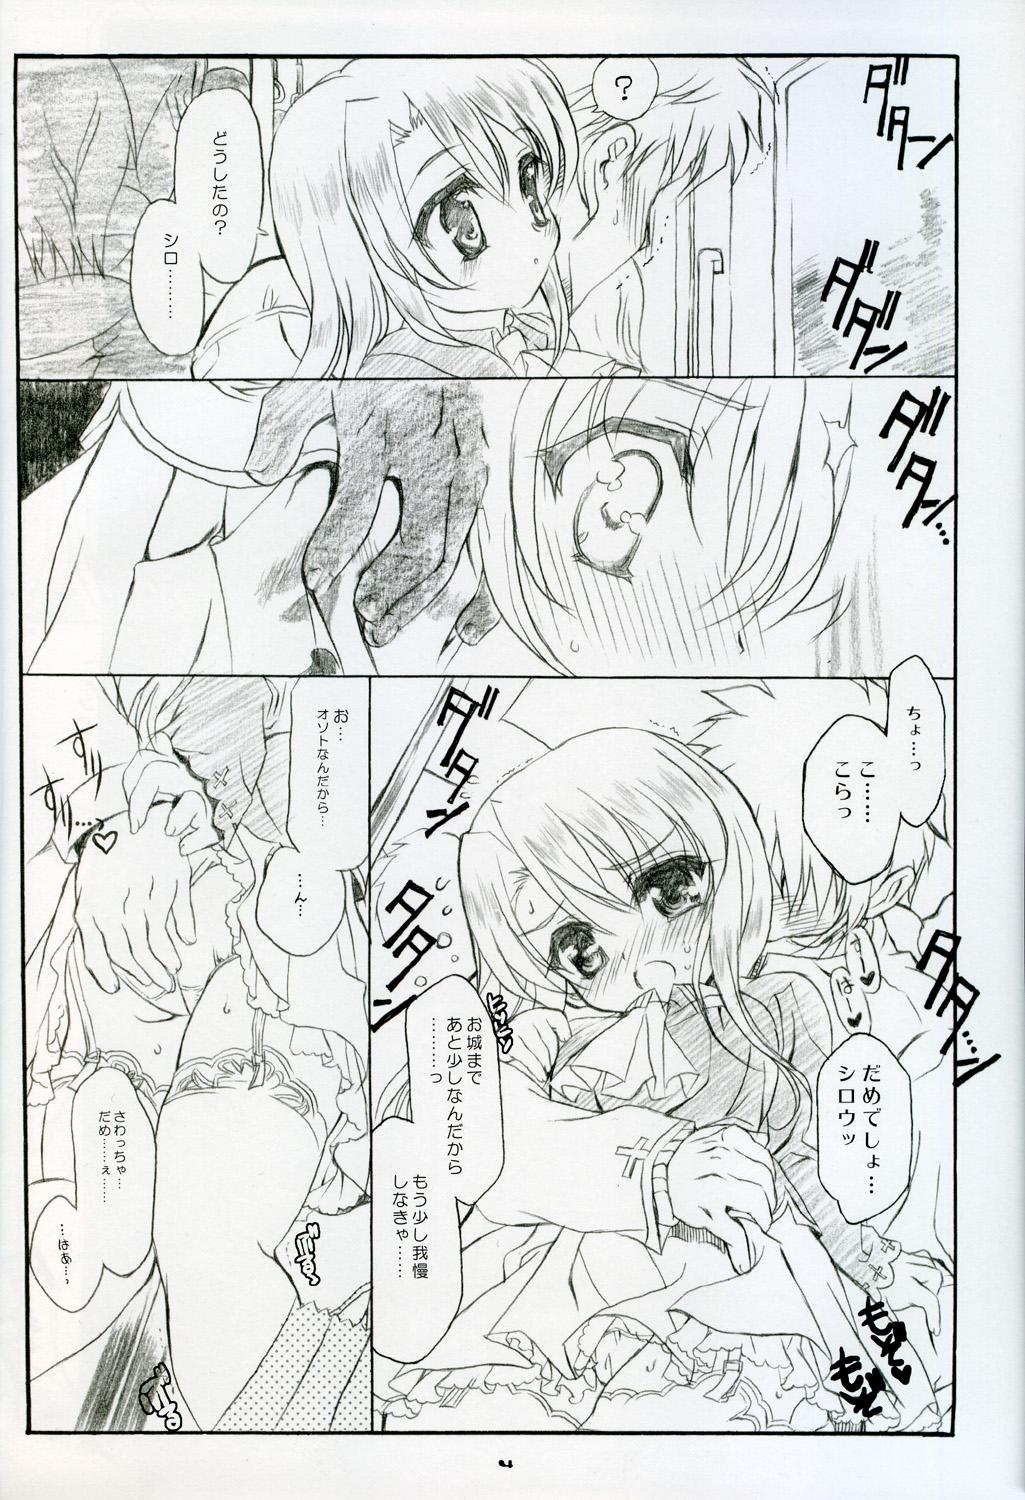 Hottie Illya Train Shopping - Fate stay night Anal Play - Page 4